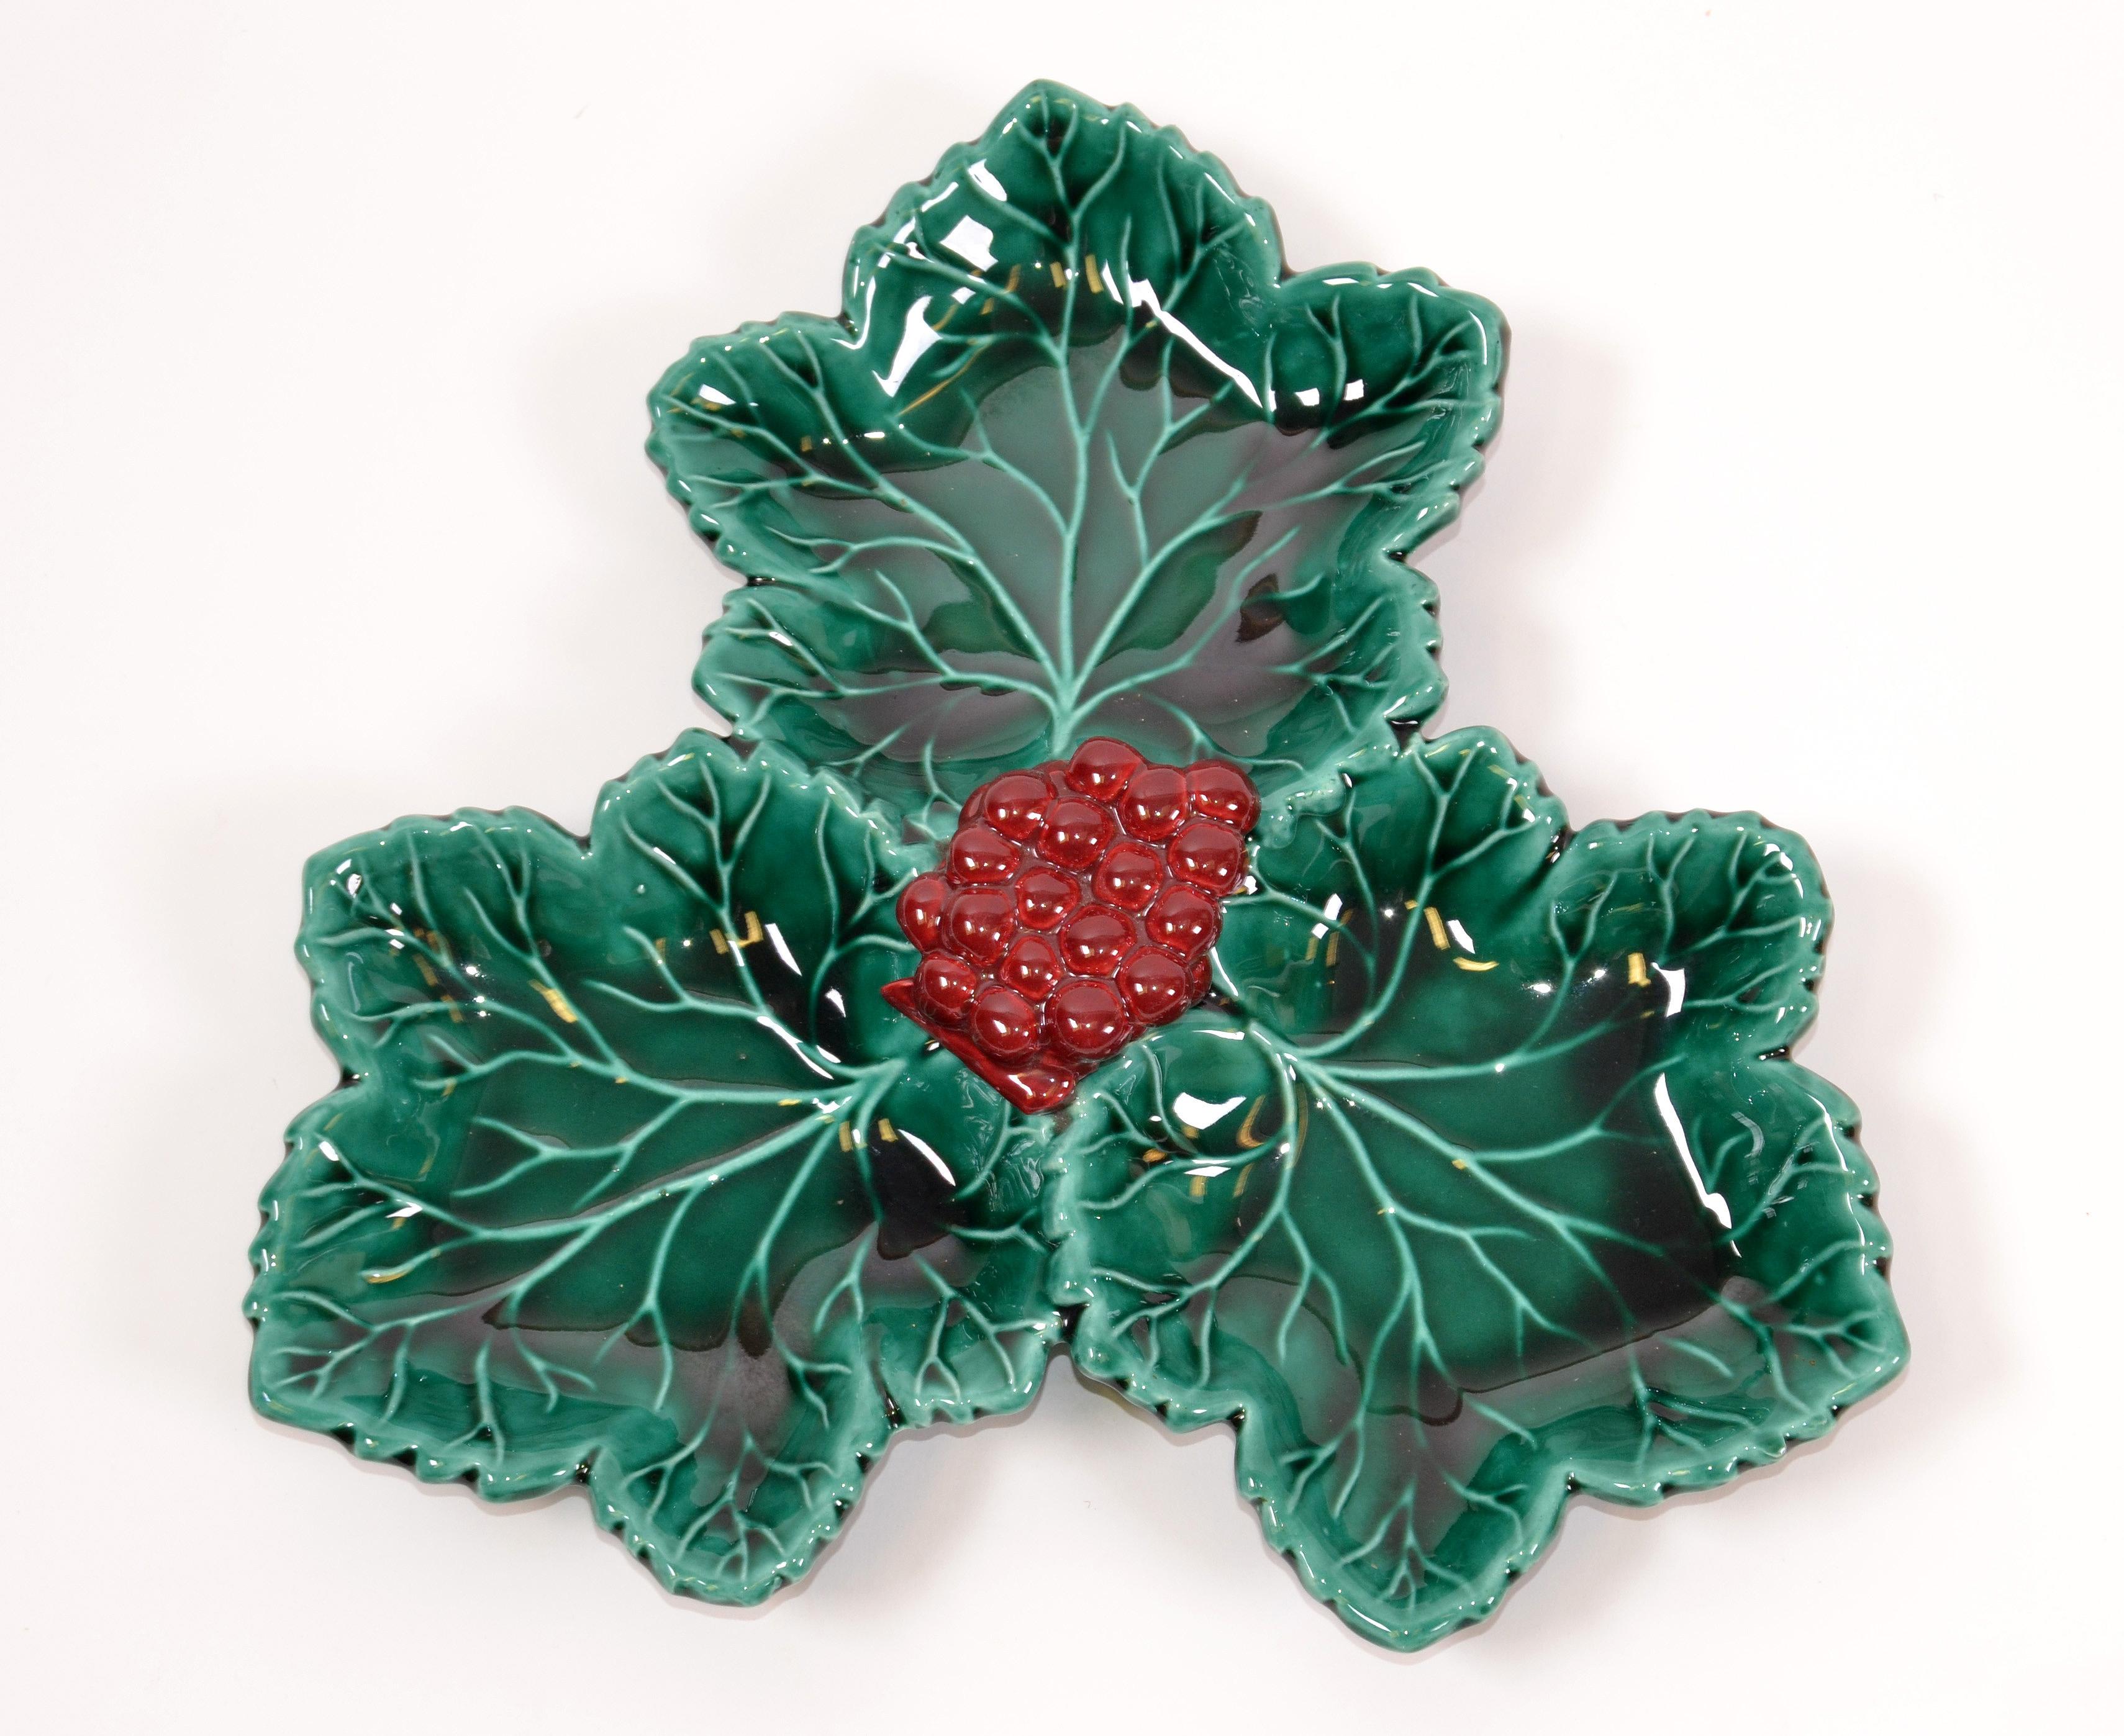 Vallauris French Glazed Grapes & Vine Leaves Ceramic Serving Plate Green and Red For Sale 1